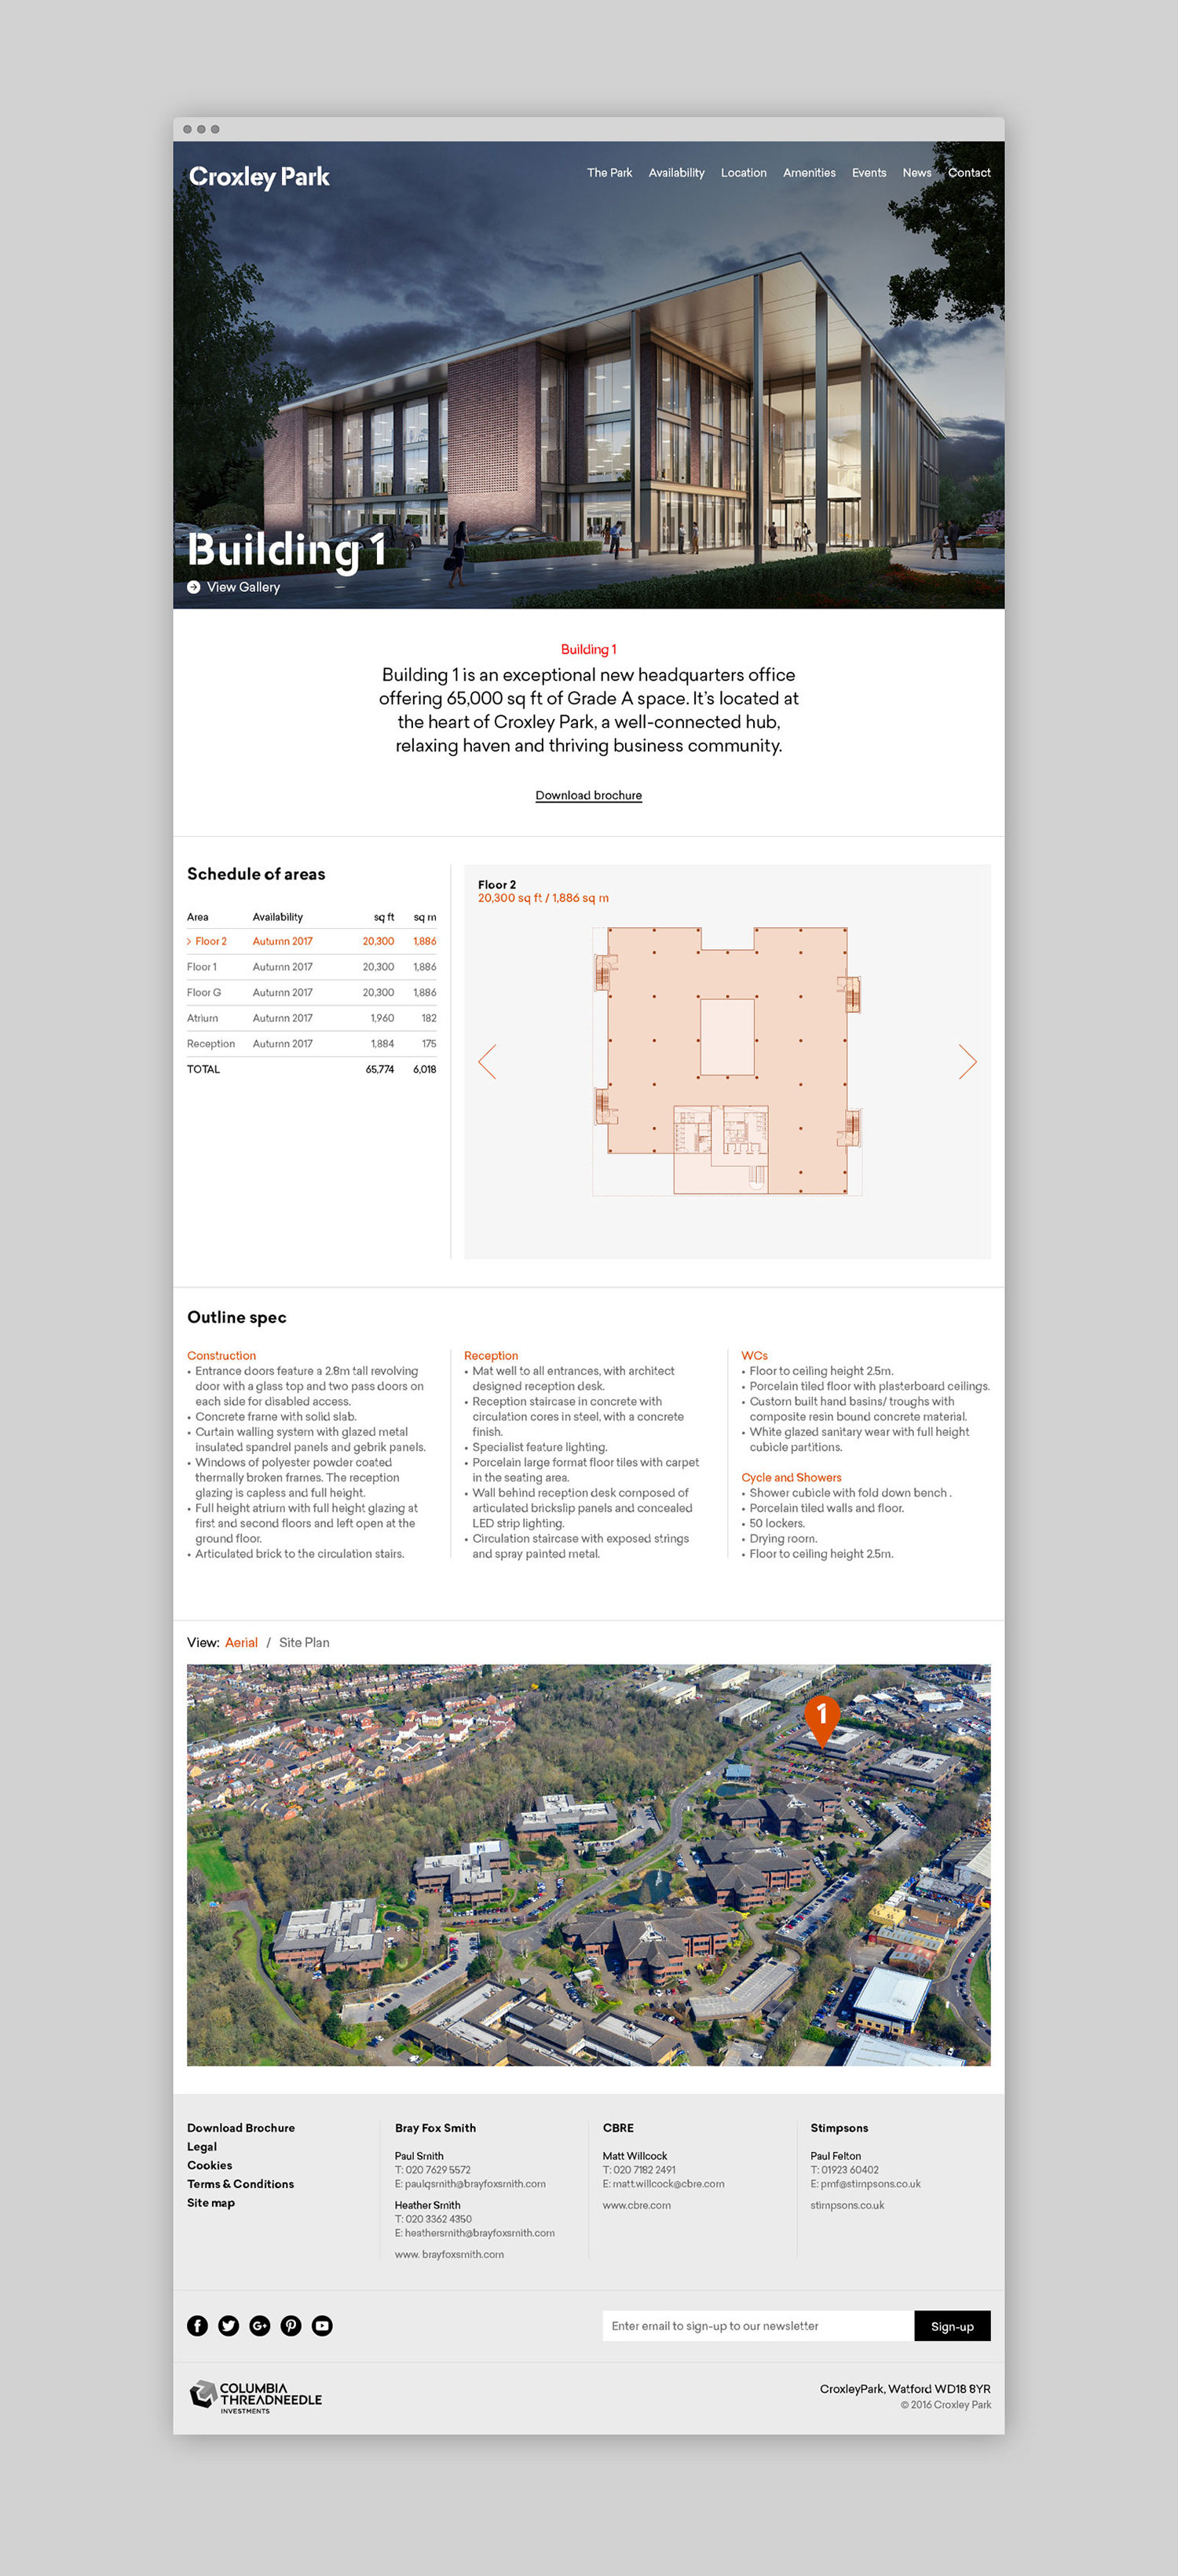 Logo, brochure, typography, illustration and website by Blast for UK business park Croxley Park